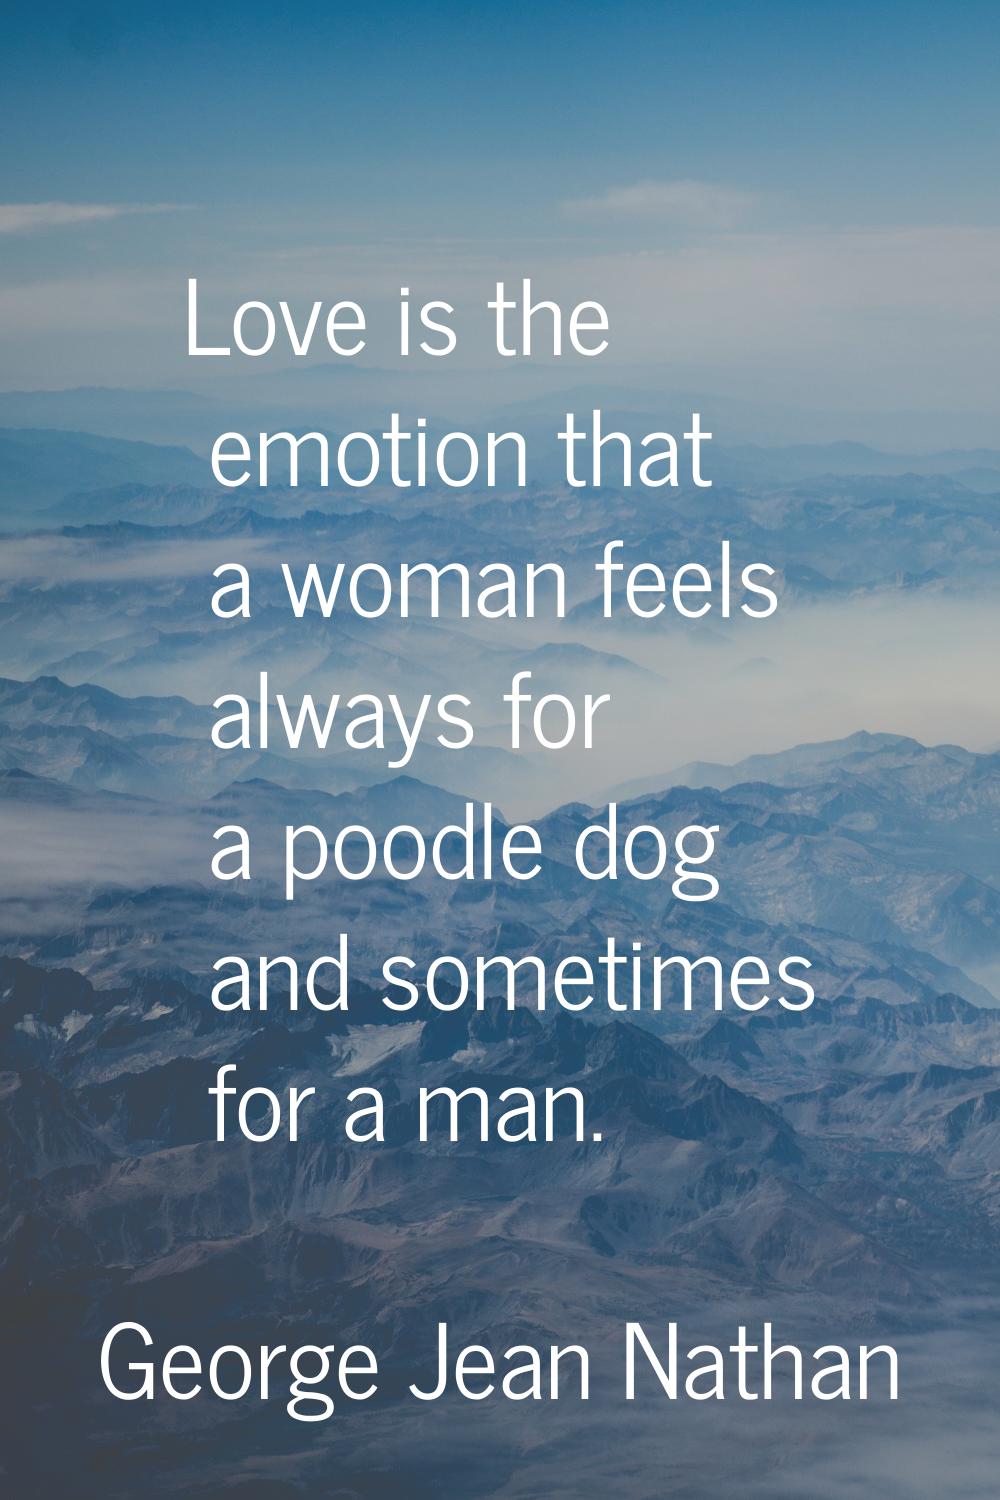 Love is the emotion that a woman feels always for a poodle dog and sometimes for a man.